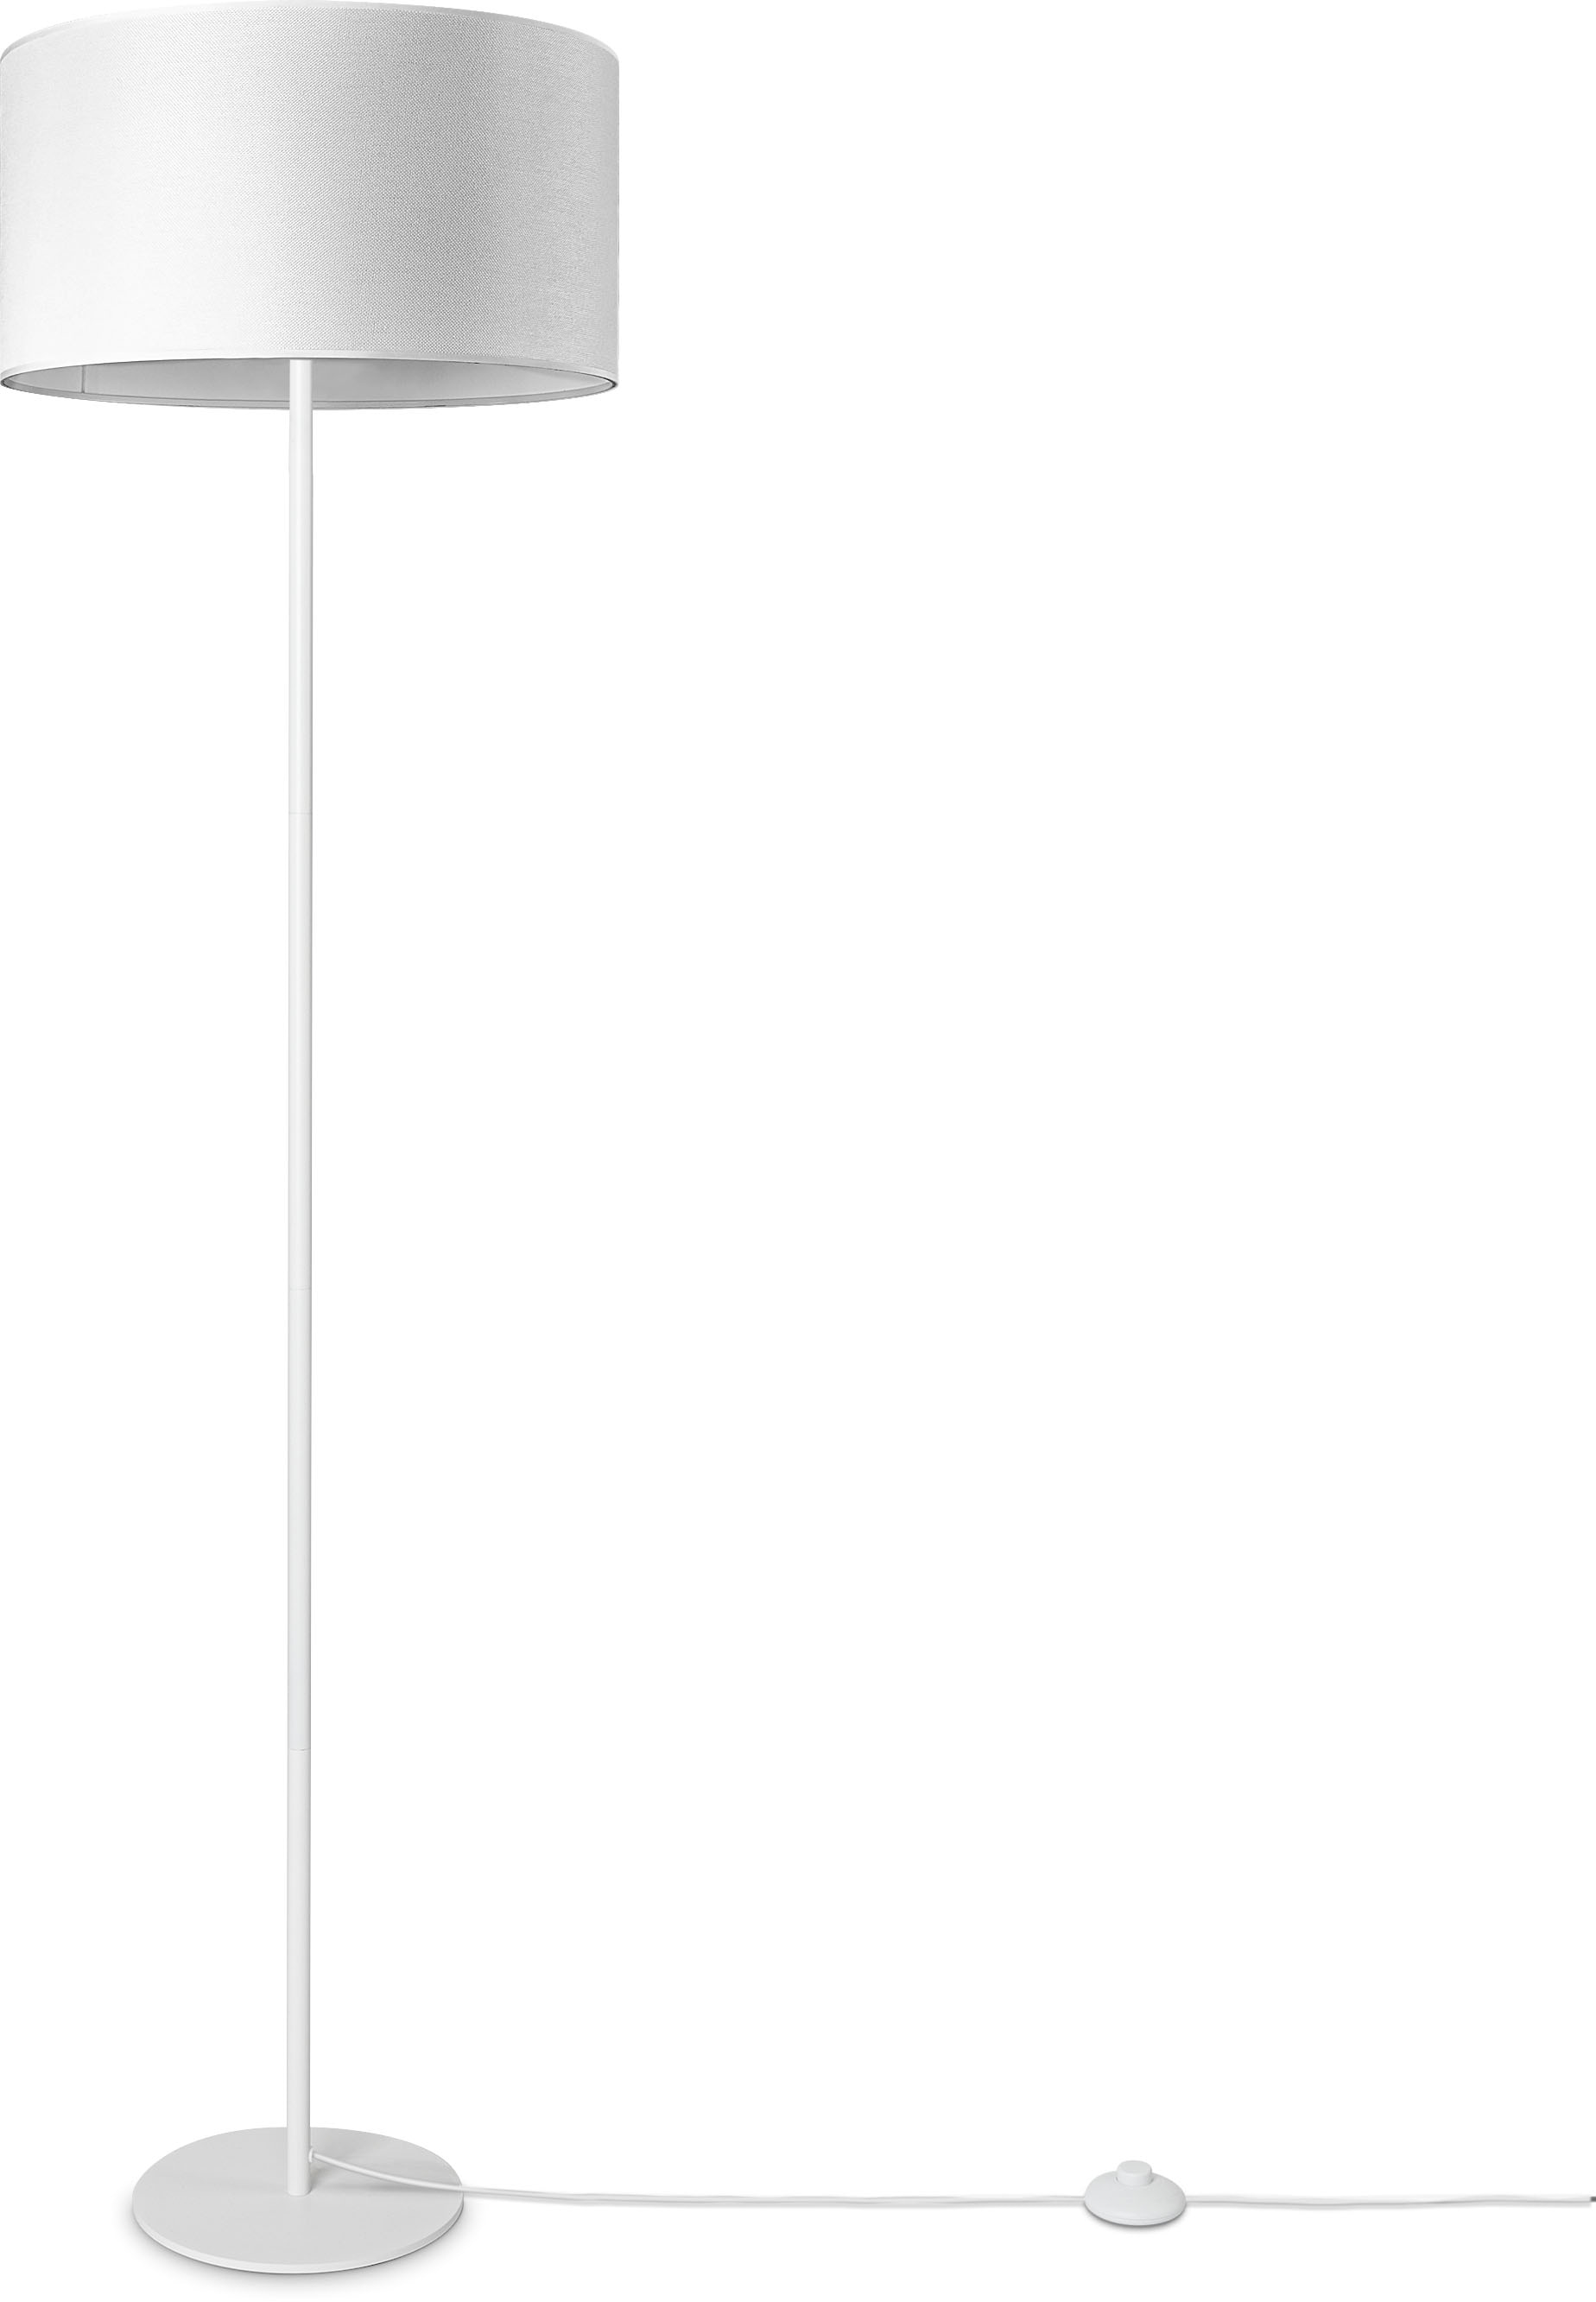 Paco Home Stehlampe »LUCA CANVAS UNI COLOR«, Lampenschirm Stoff Wohnzimmer Leselampe Büro E27 Stehlampe Skandi